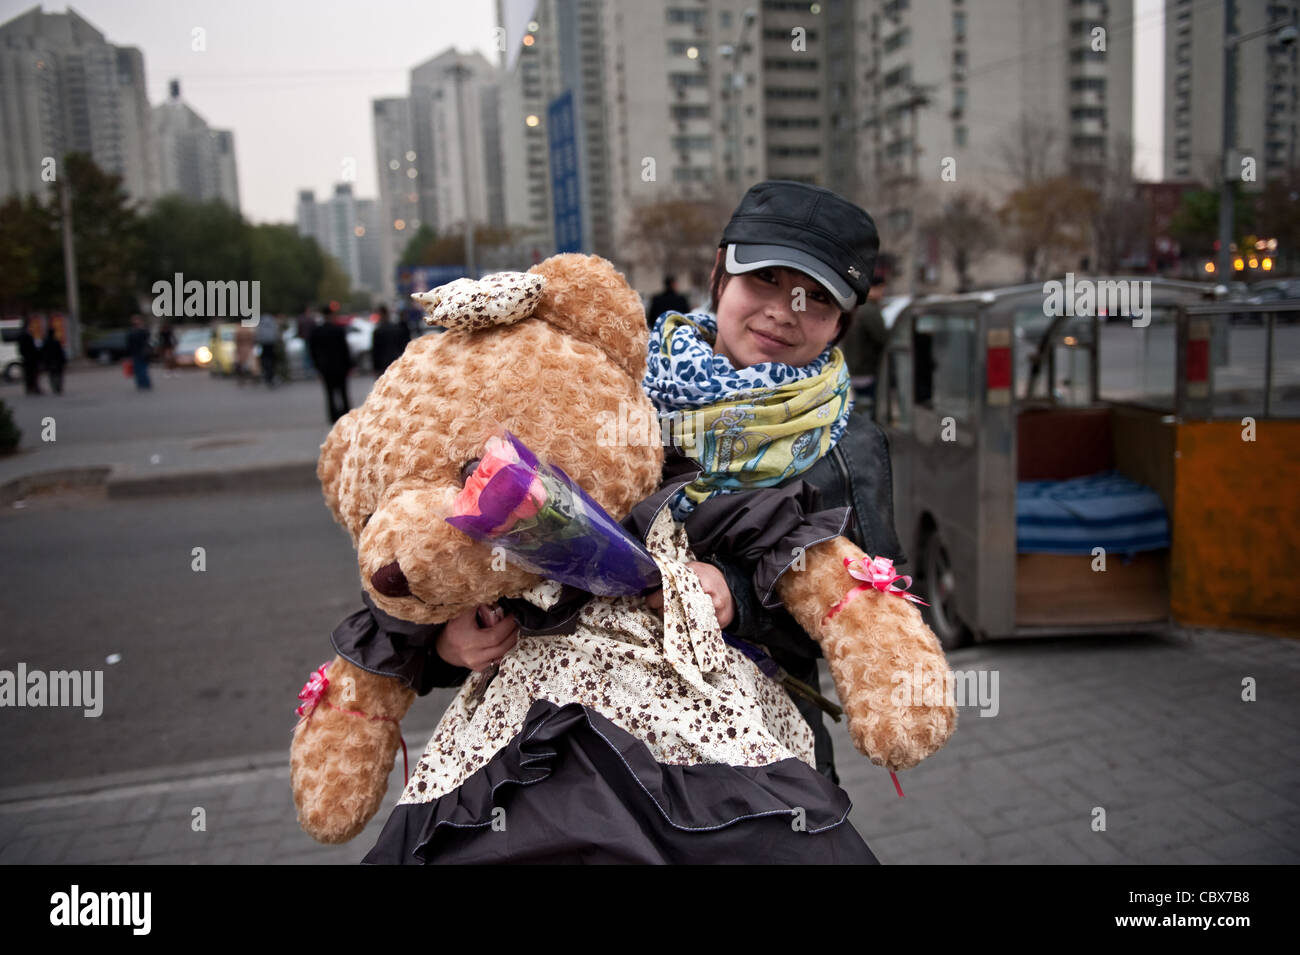 Beijing, Wangjing. A young woman on her way to a friend with a teddy bear and flowers as  presents. Stock Photo